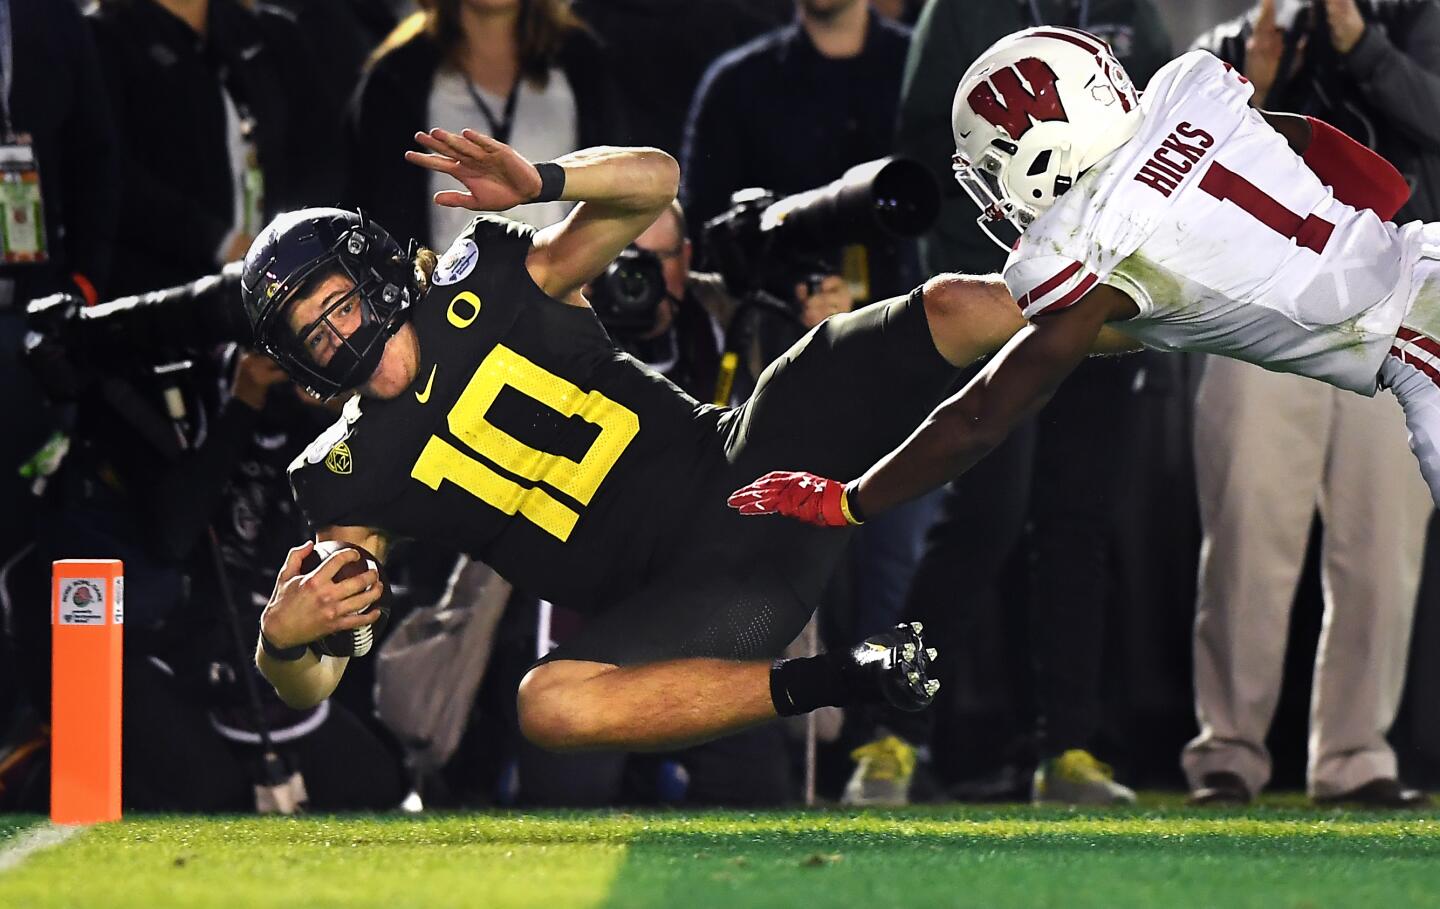 PASADENA, CALIFORNIA JANUARY 1, 2020-Oregon quarterback Justin Herbert scores the go-ahead touchdown against Wisconsin cornerback Faion Hicks in the 4th quarter at the Rose Bowl in Pasadena Wednesday. (Wally Skalij/Los Angerles Times)